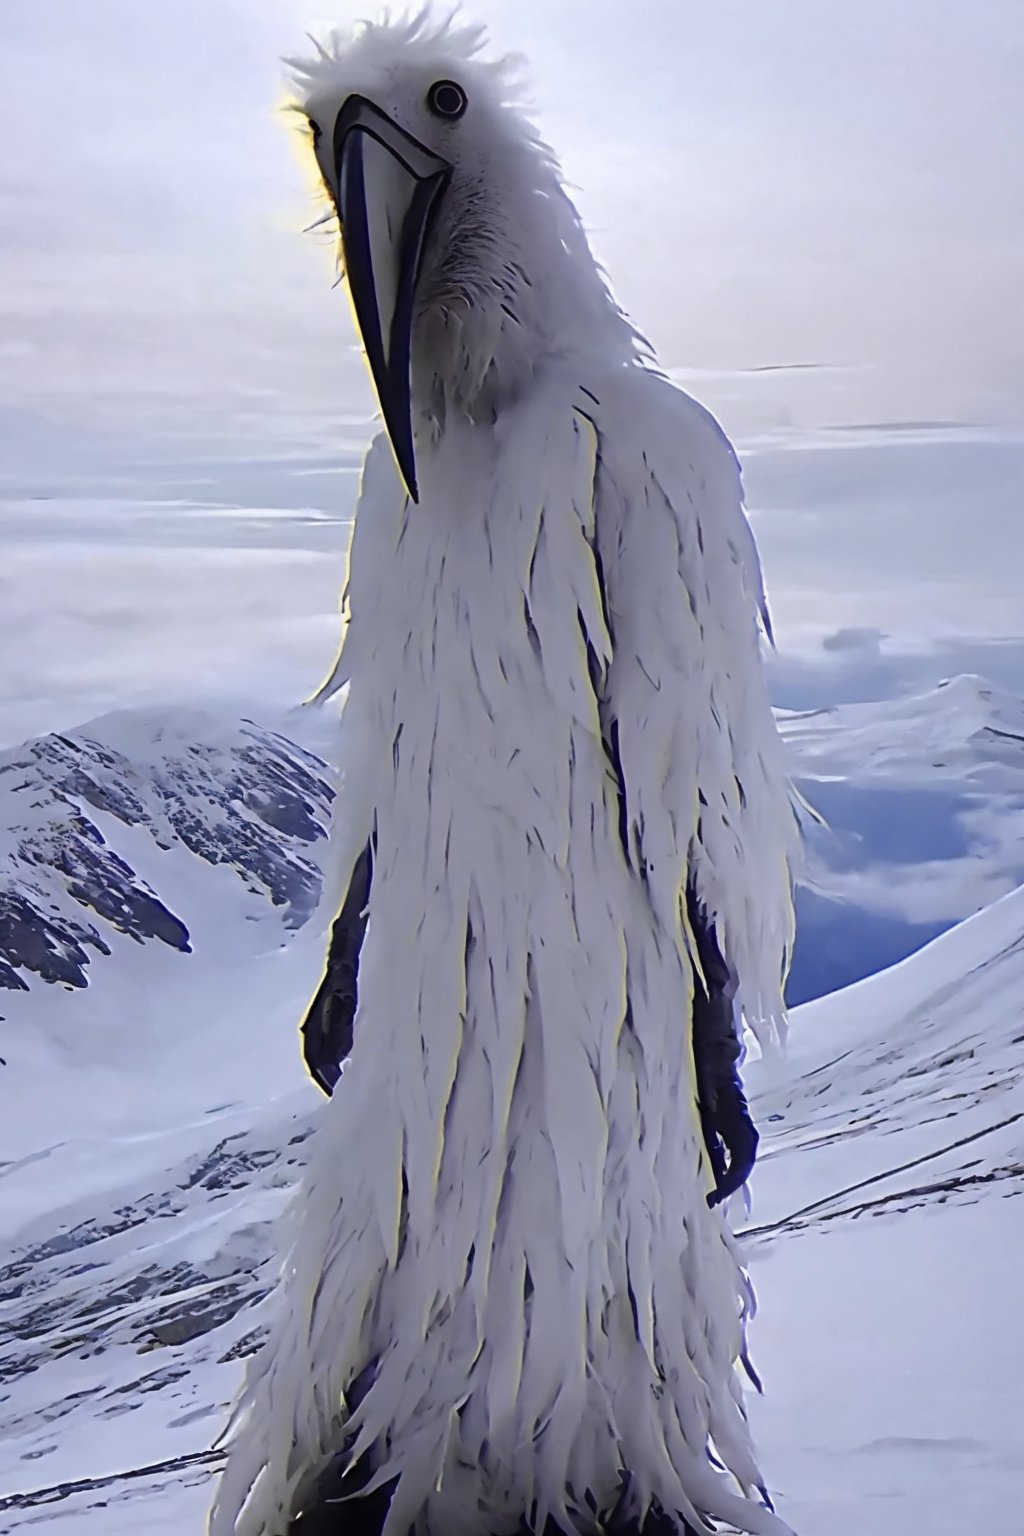 Opium bird, standing, feathers, white feathers, bird, birdman, humanoid, bird head, with beak, stylized, thin, full body, bird legs, bird arms, sinister, terrifying, beautiful

High quality, HD, 4kHD, cinematic, atmospheric, realistic, ultra-realistic
snow, mountain, cloudy, gray sky, dark clouds
More Detail,lora:largebulg1-000012:1,AIDA_NH_humans